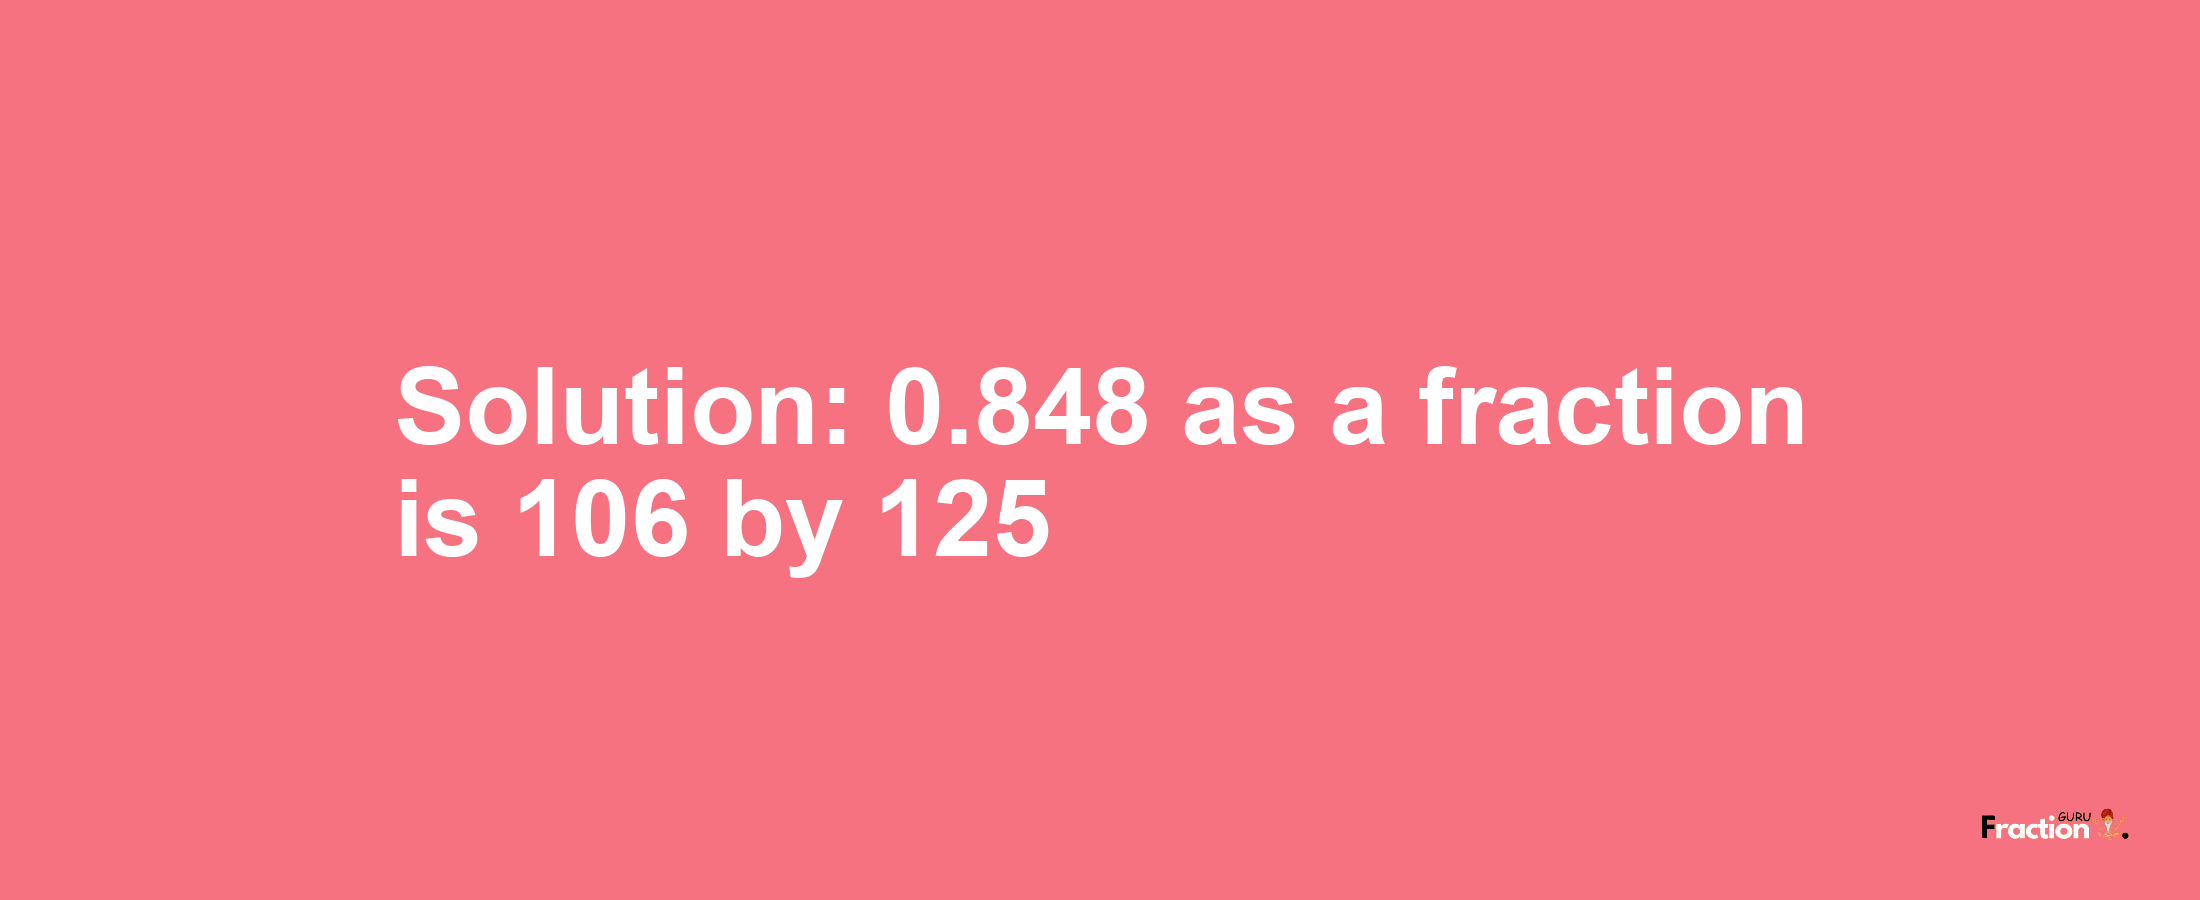 Solution:0.848 as a fraction is 106/125